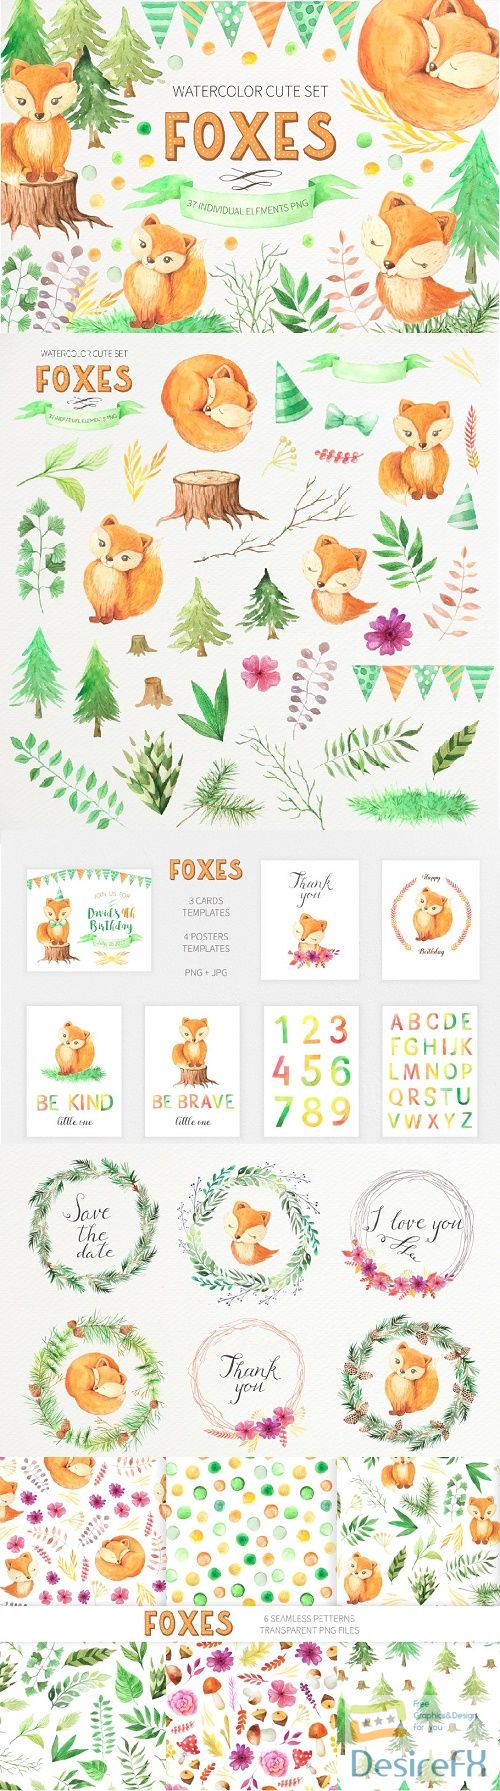 Watercolor Cute Foxes and Floral Set - 1638019